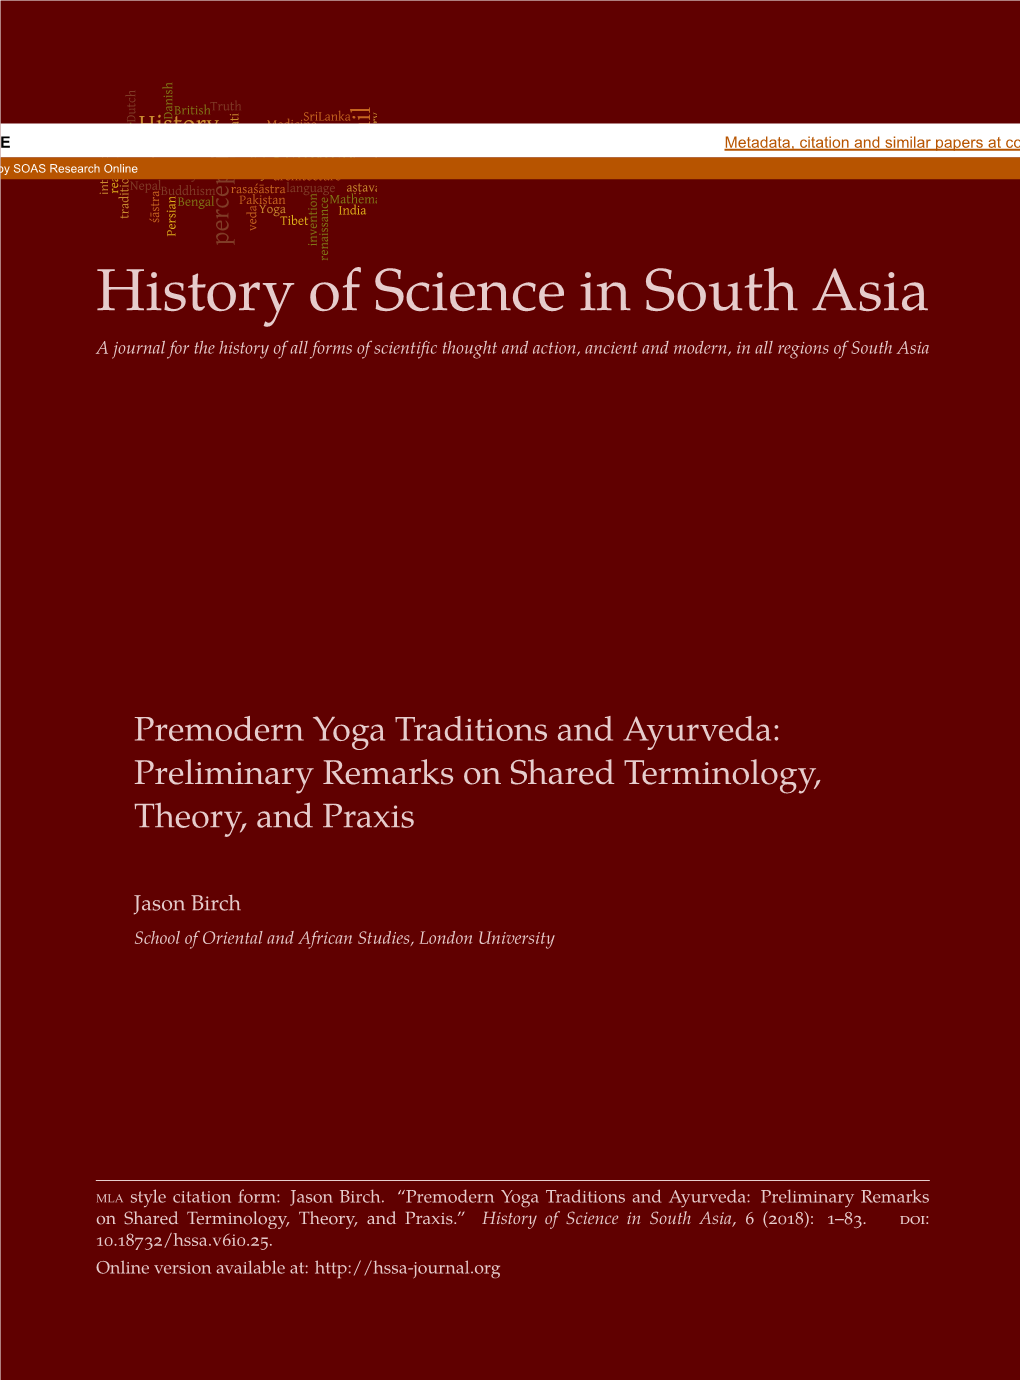 Premodern Yoga Traditions and Ayurveda: Preliminary Remarks on Shared Terminology, Theory, and Praxis